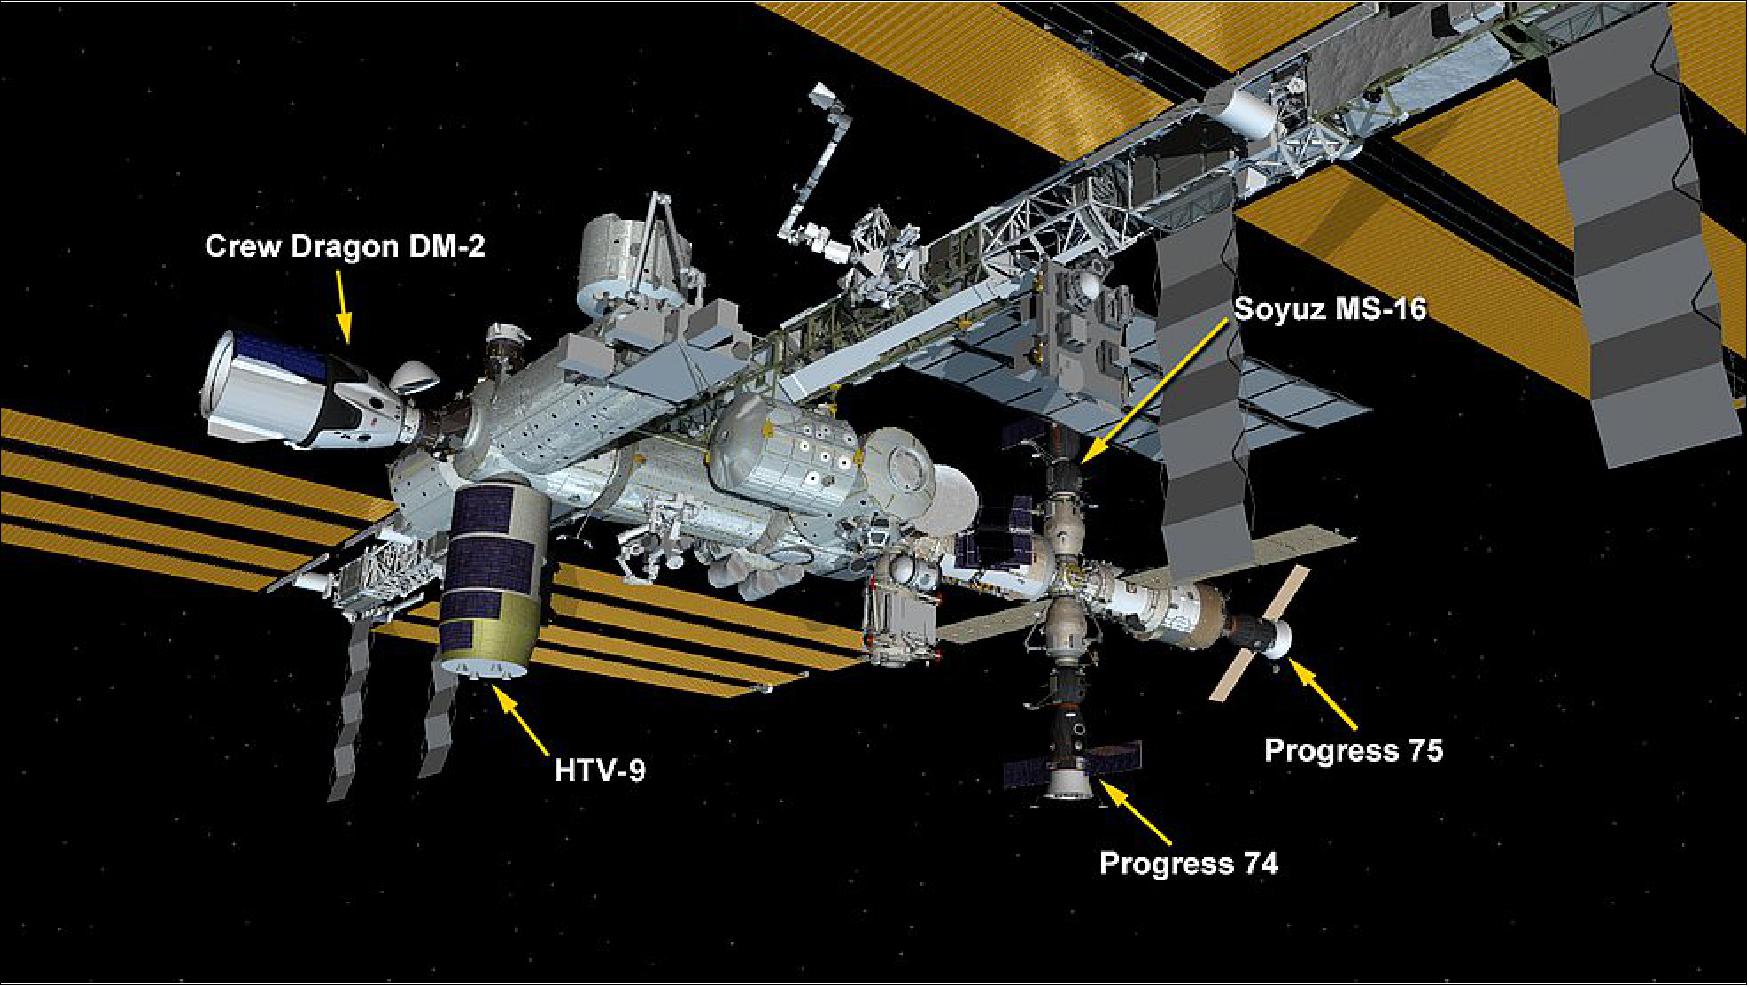 Figure 15: May 31, 2020: International Space Station Configuration. Five spaceships are attached to the space station including the SpaceX Crew Dragon, the HTV-9 resupply ship from JAXA (Japan Aerospace Exploration Agency) and Russia's Progress 74 and 75 resupply ships and Soyuz MS-16 crew ship (image credit: NASA) 14)